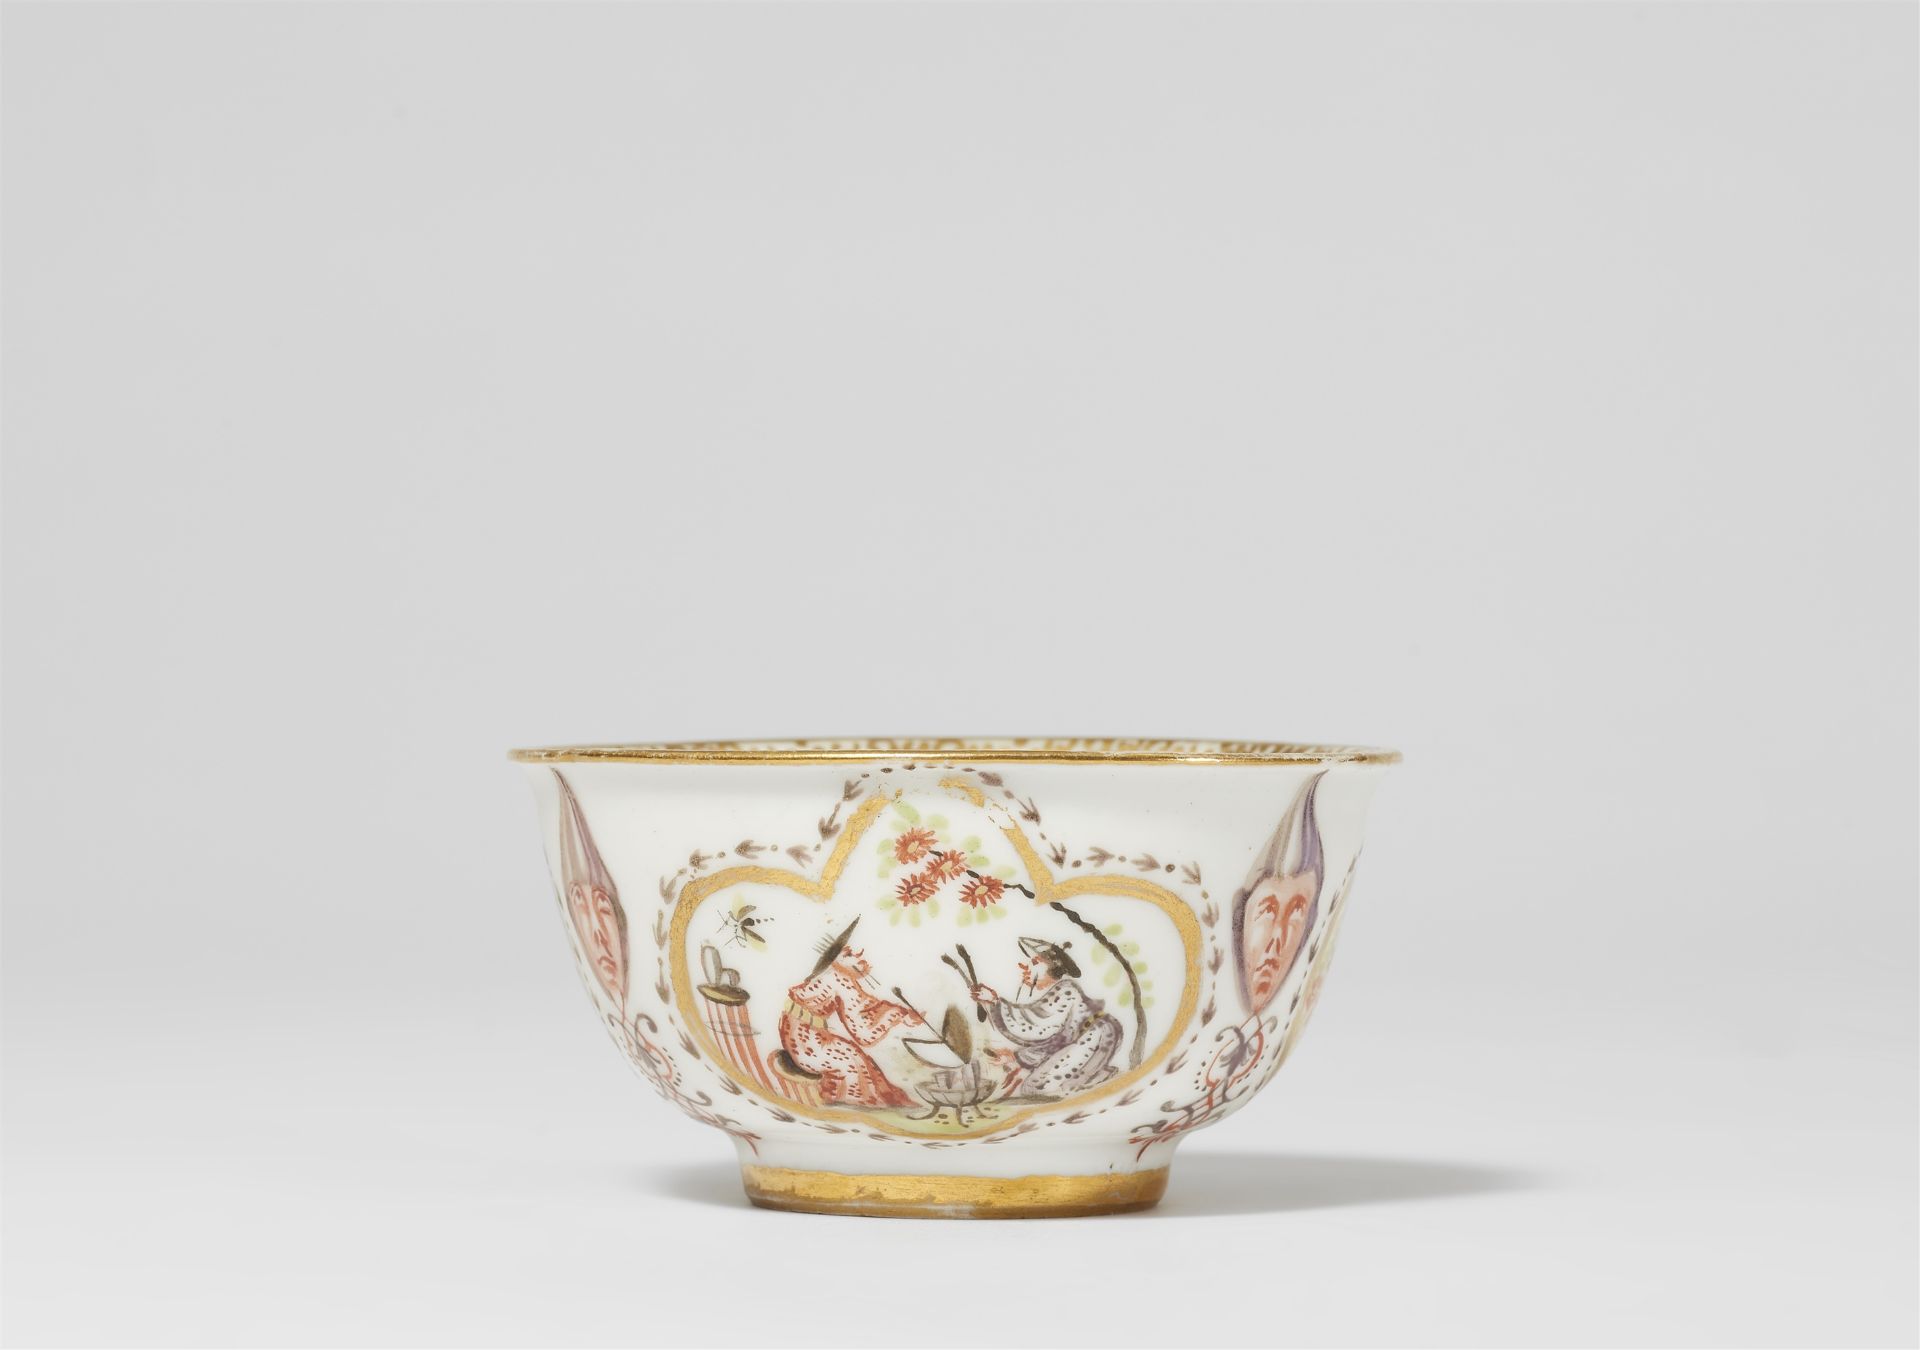 A Meissen porcelain tea bowl and saucer with Chinoiserie decor - Image 3 of 4